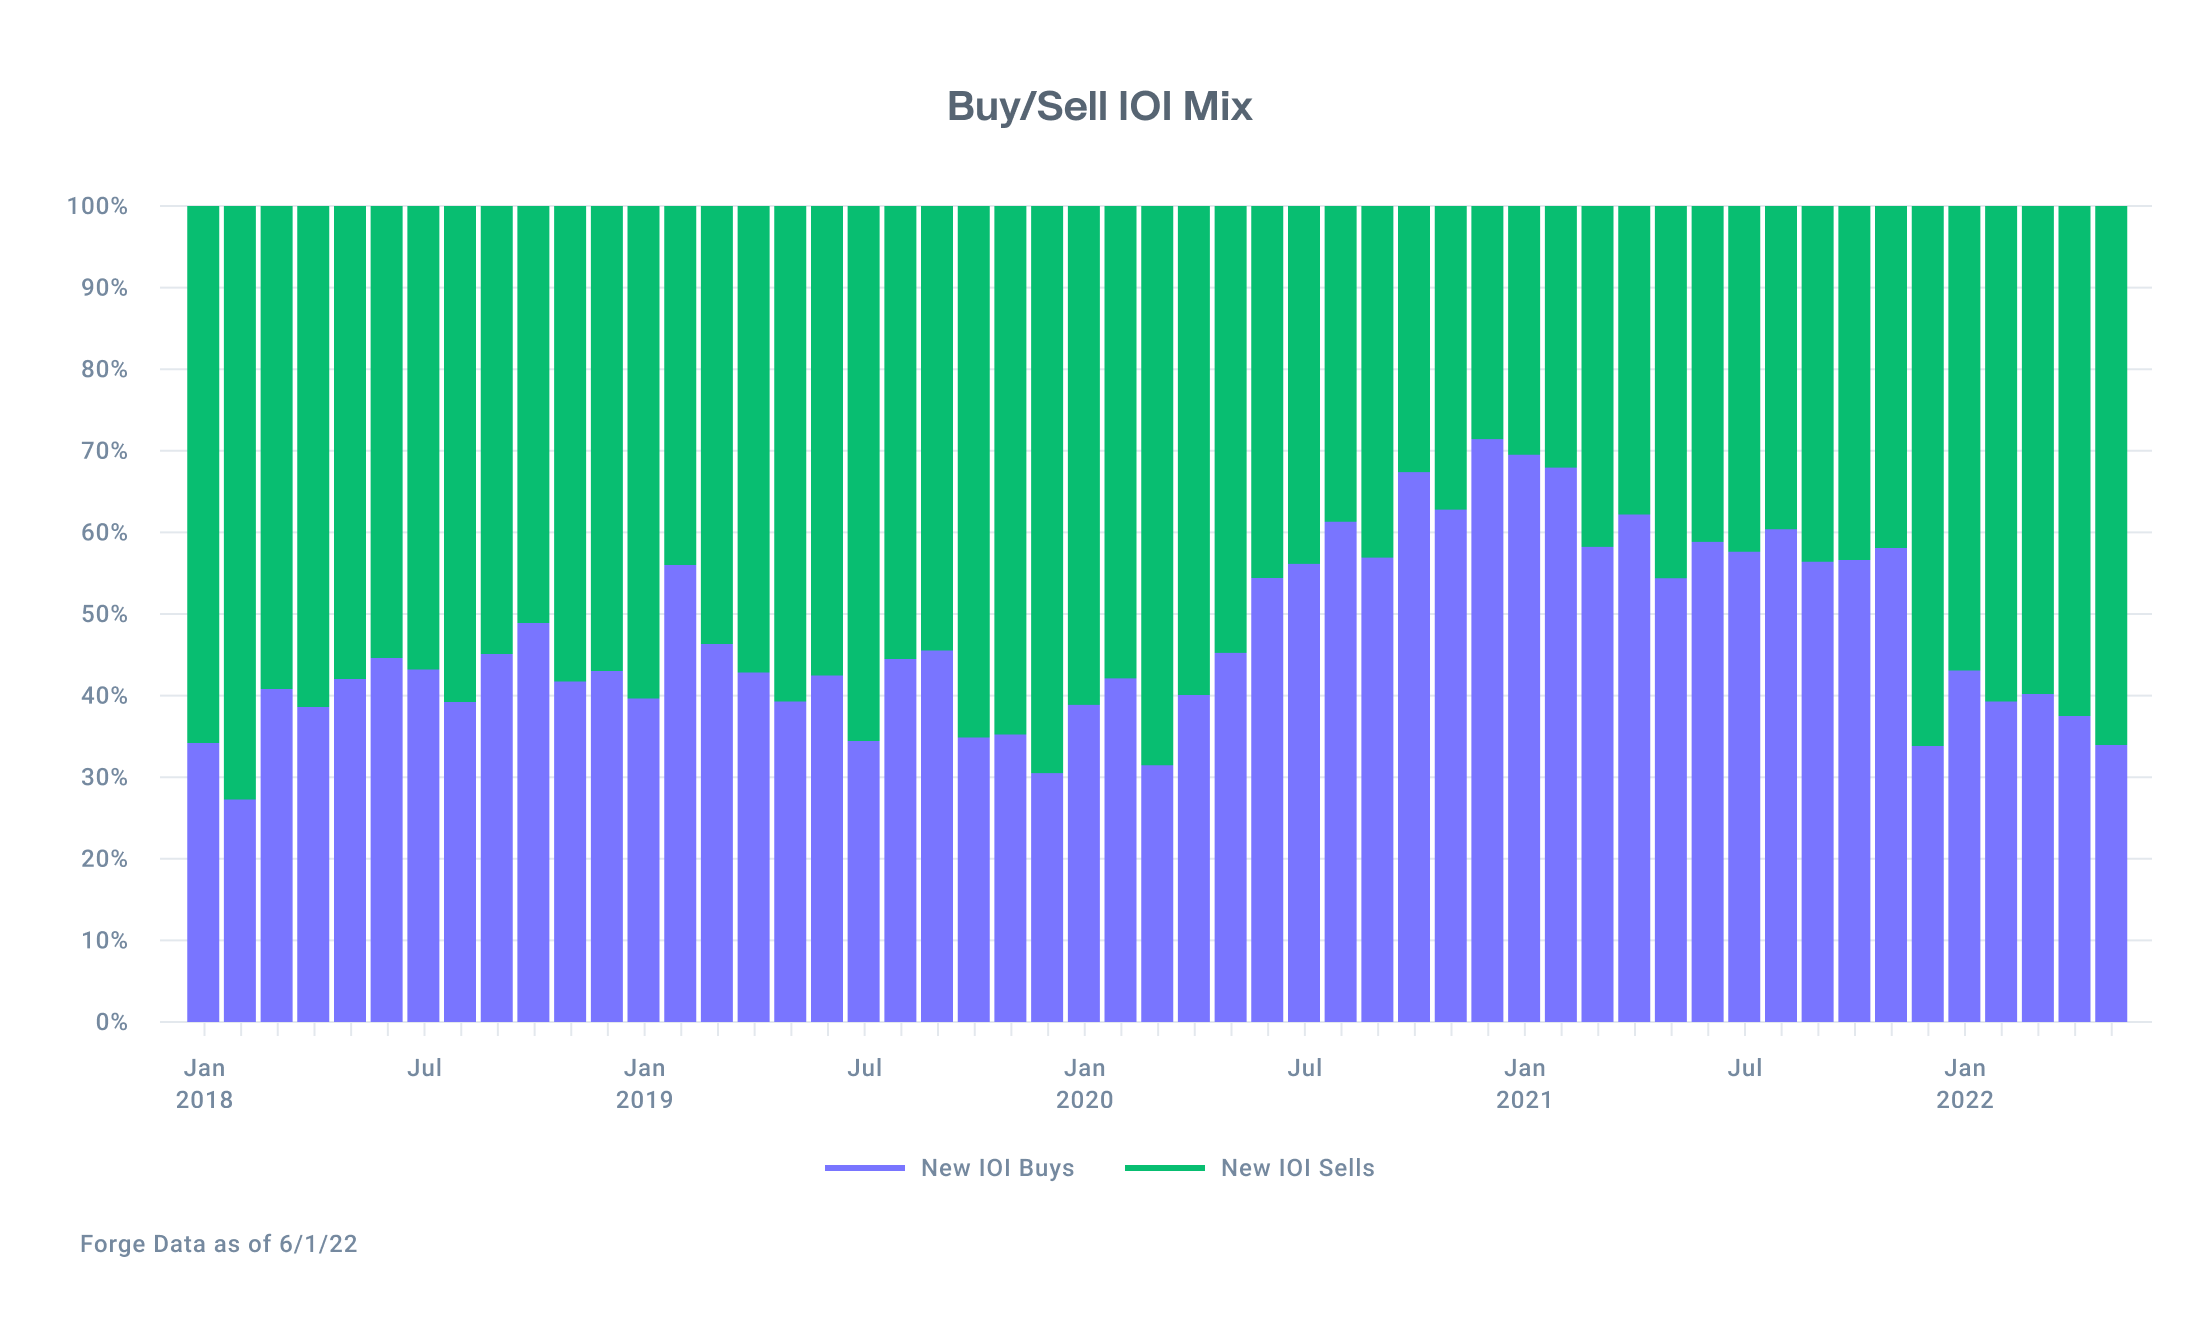 Graph showing the mix of buy and sell interest from Forge Markets with 68% of sell interest in May